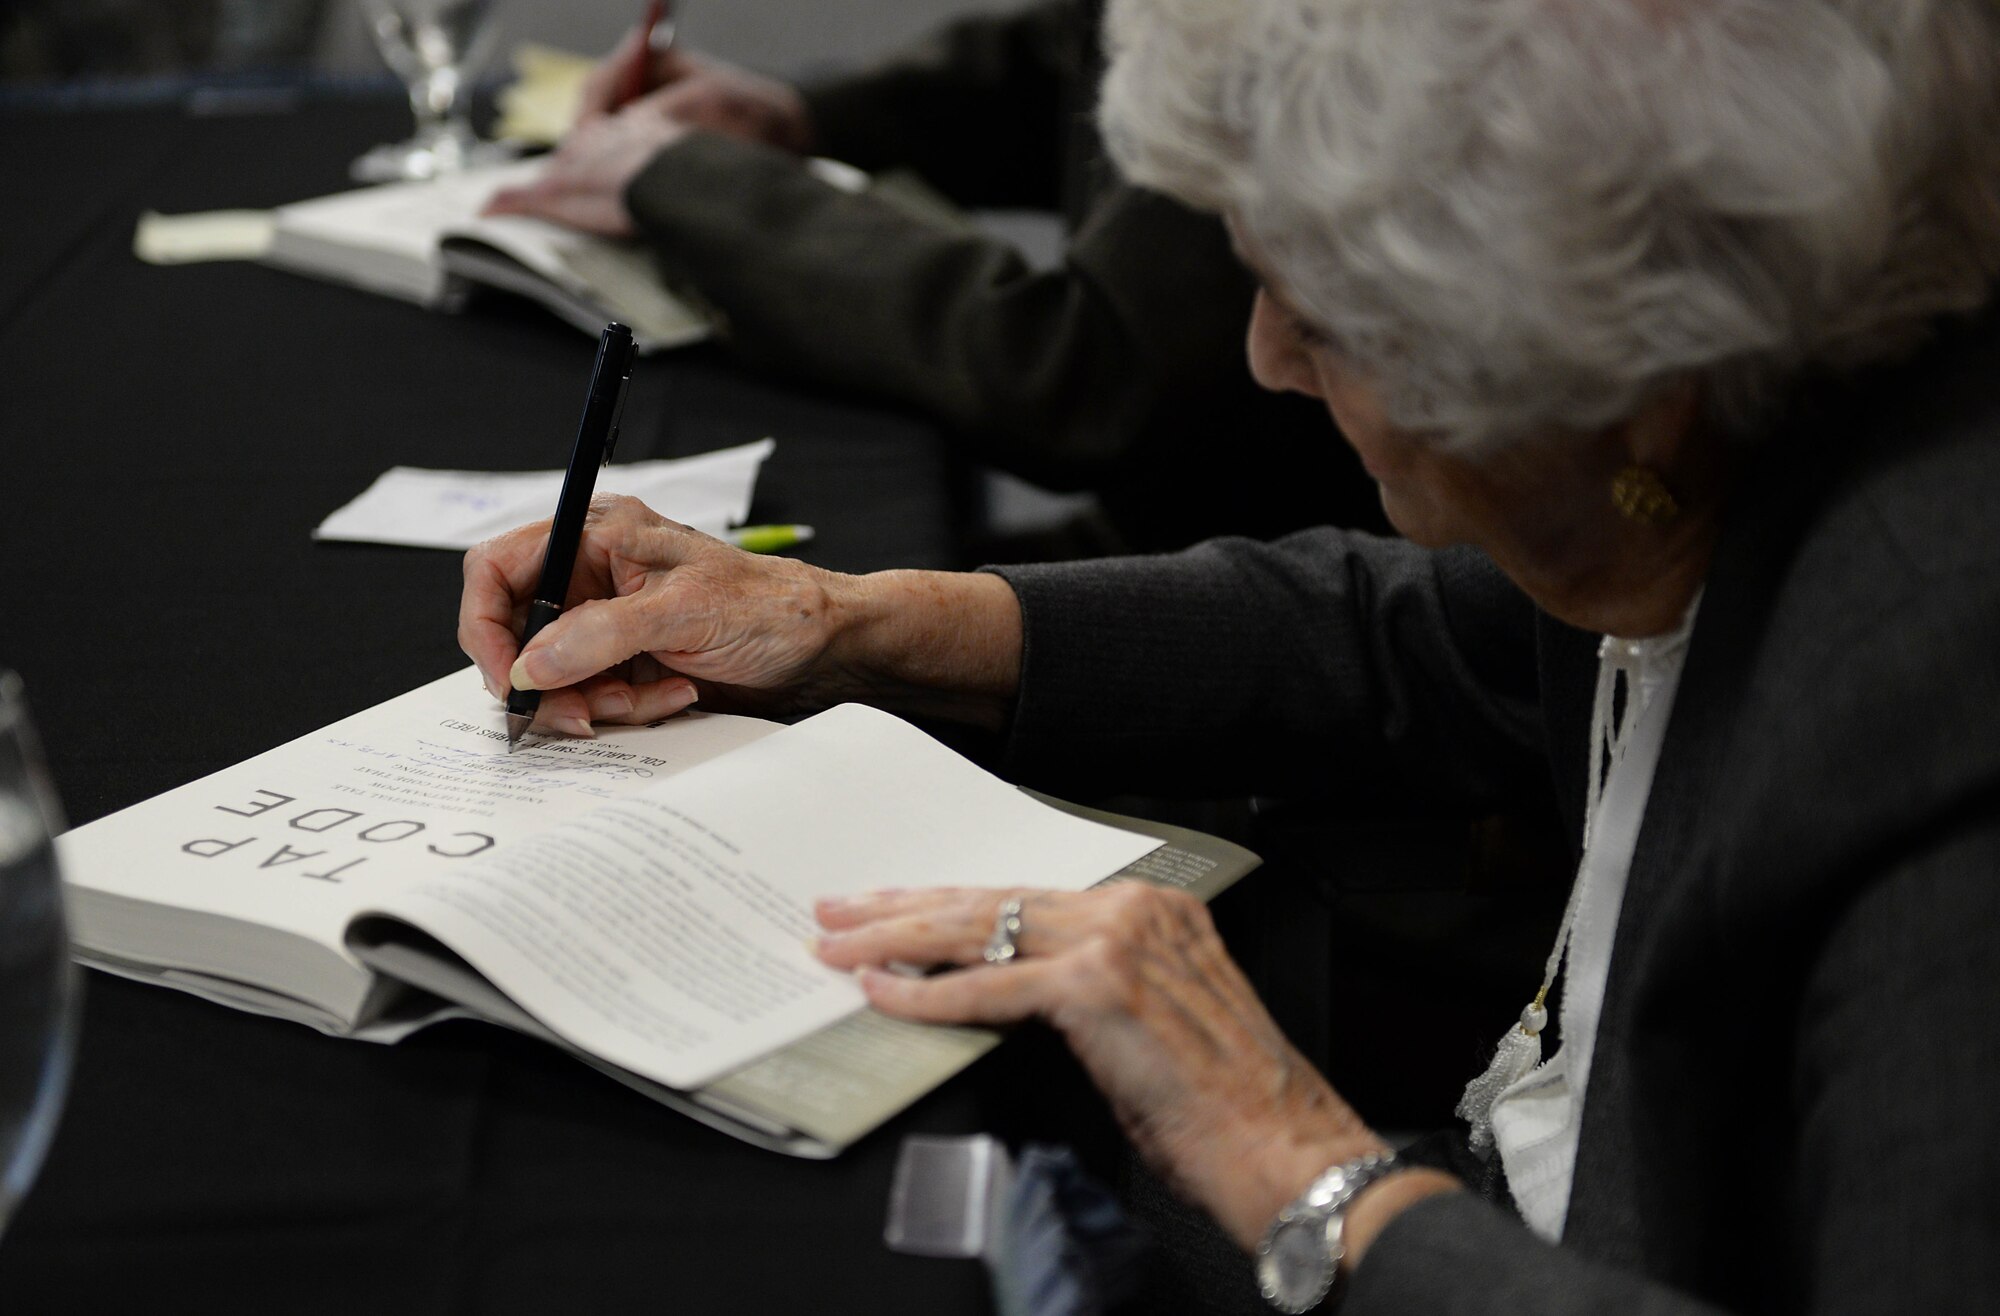 Louise Harris, wife of Retired Air Force Col. Carlyle “Smitty” Harris, signs her name during a book signing Jan. 10, 2020, at the Columbus Event Center on Columbus Air Force Base, Miss. The book, written from the perspectives of Smitty and Louise, shares never-before-told details of underground operations during the Vietnam War while showcasing a true story of having the strength, dignity and resolve necessary to endure challenging circumstances. (U.S. Air Force photo by Airman 1st Class Hannah Bean)